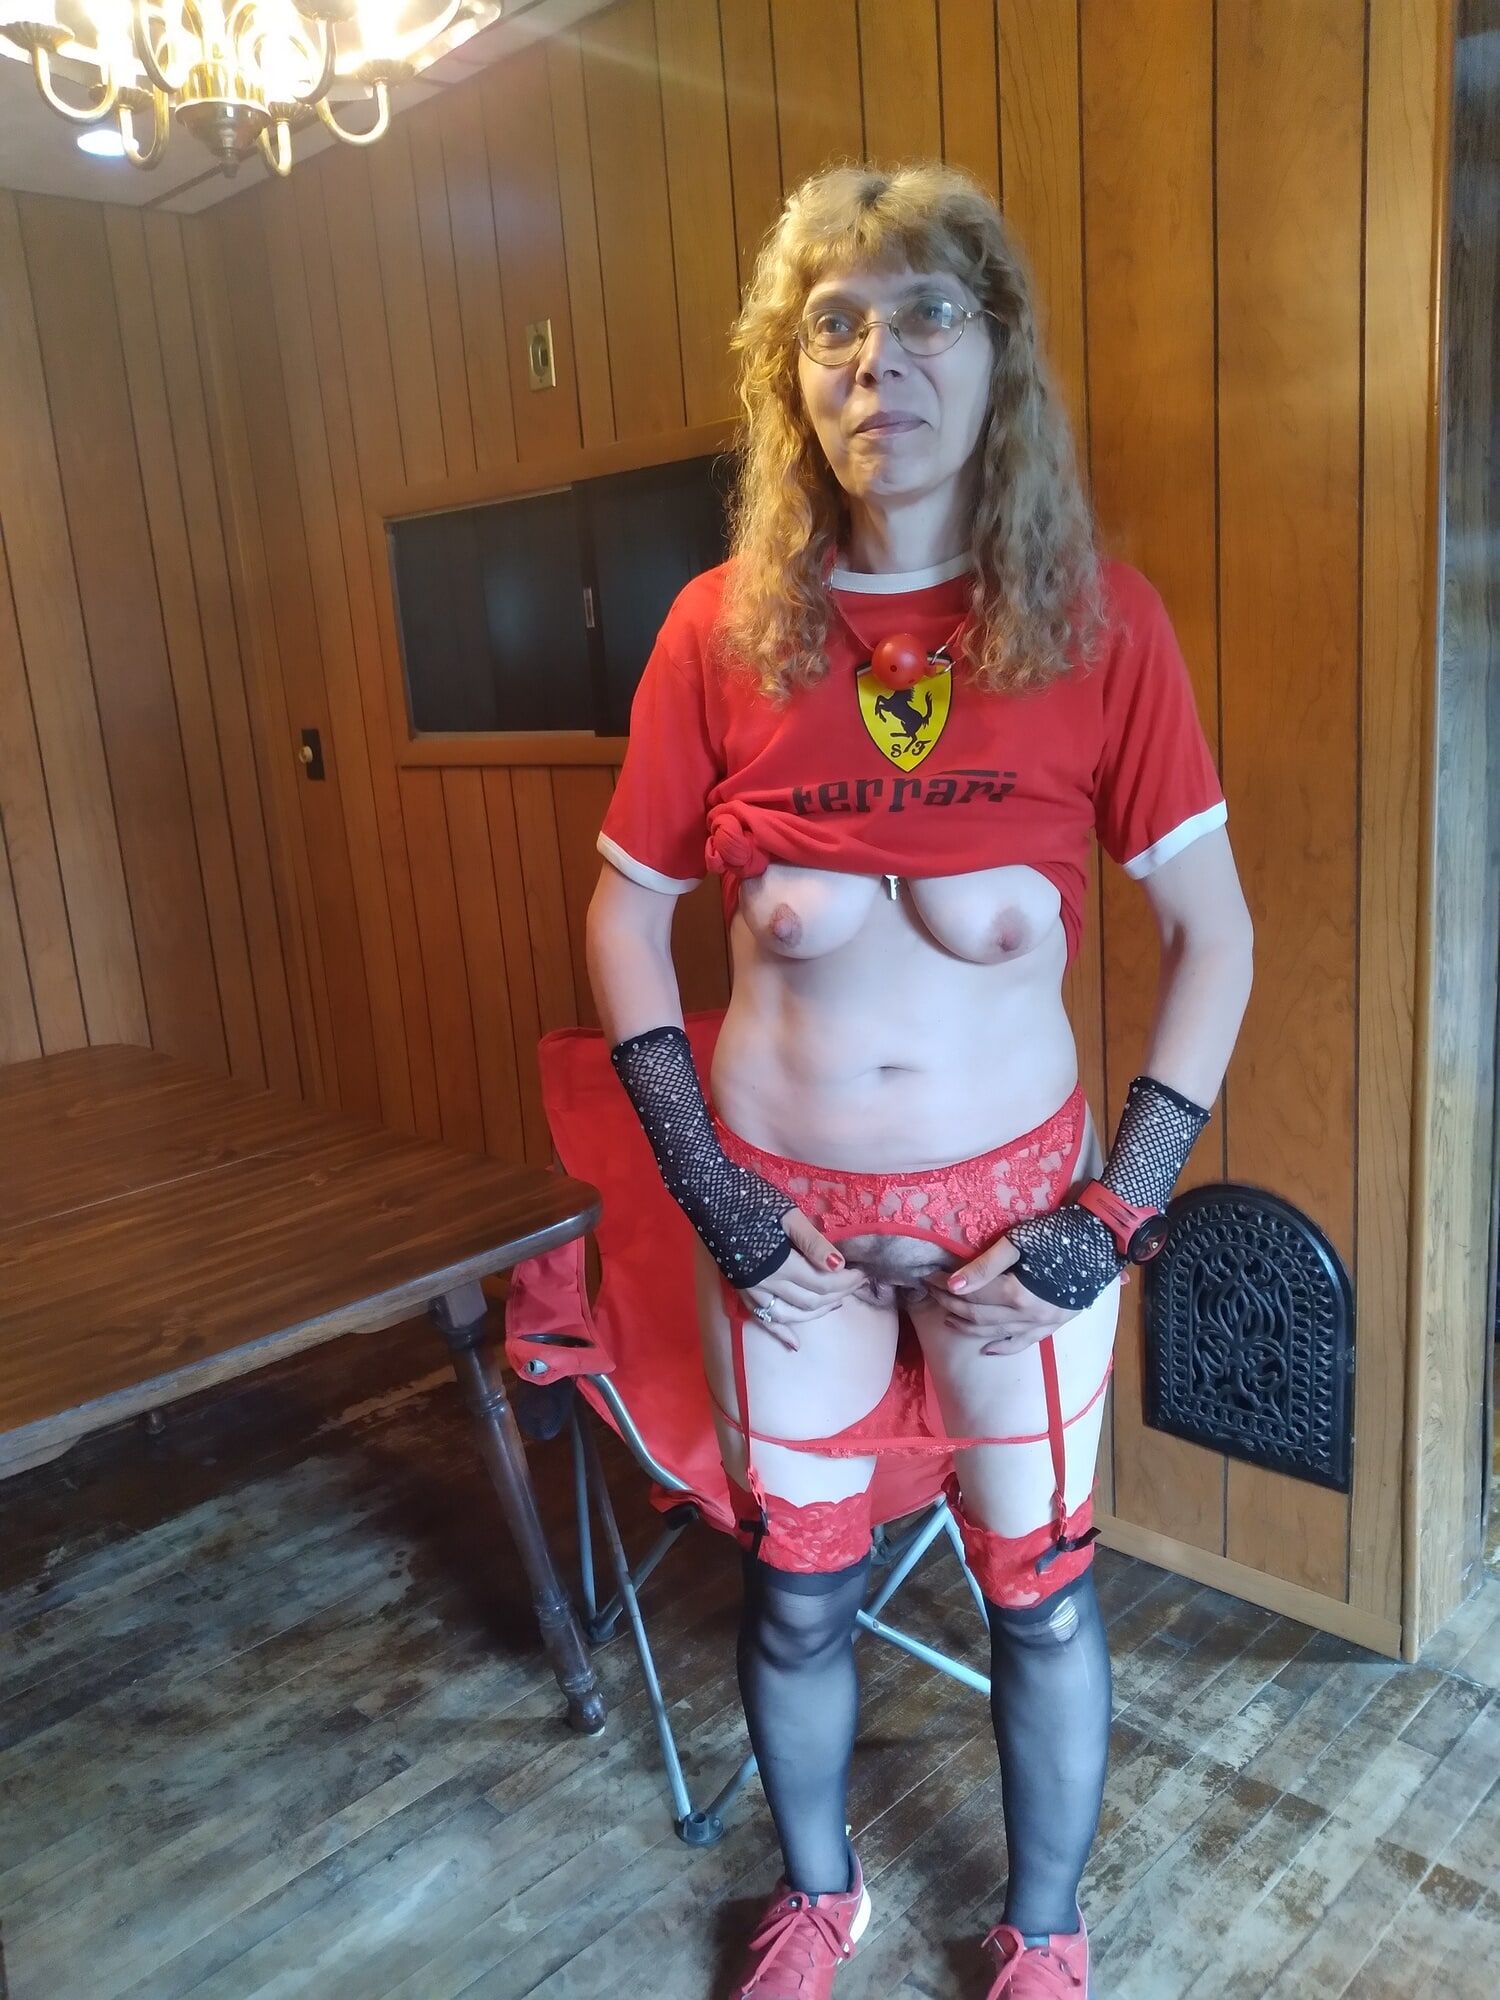 Red and black garters Ferrari outfit on breakfast table #7